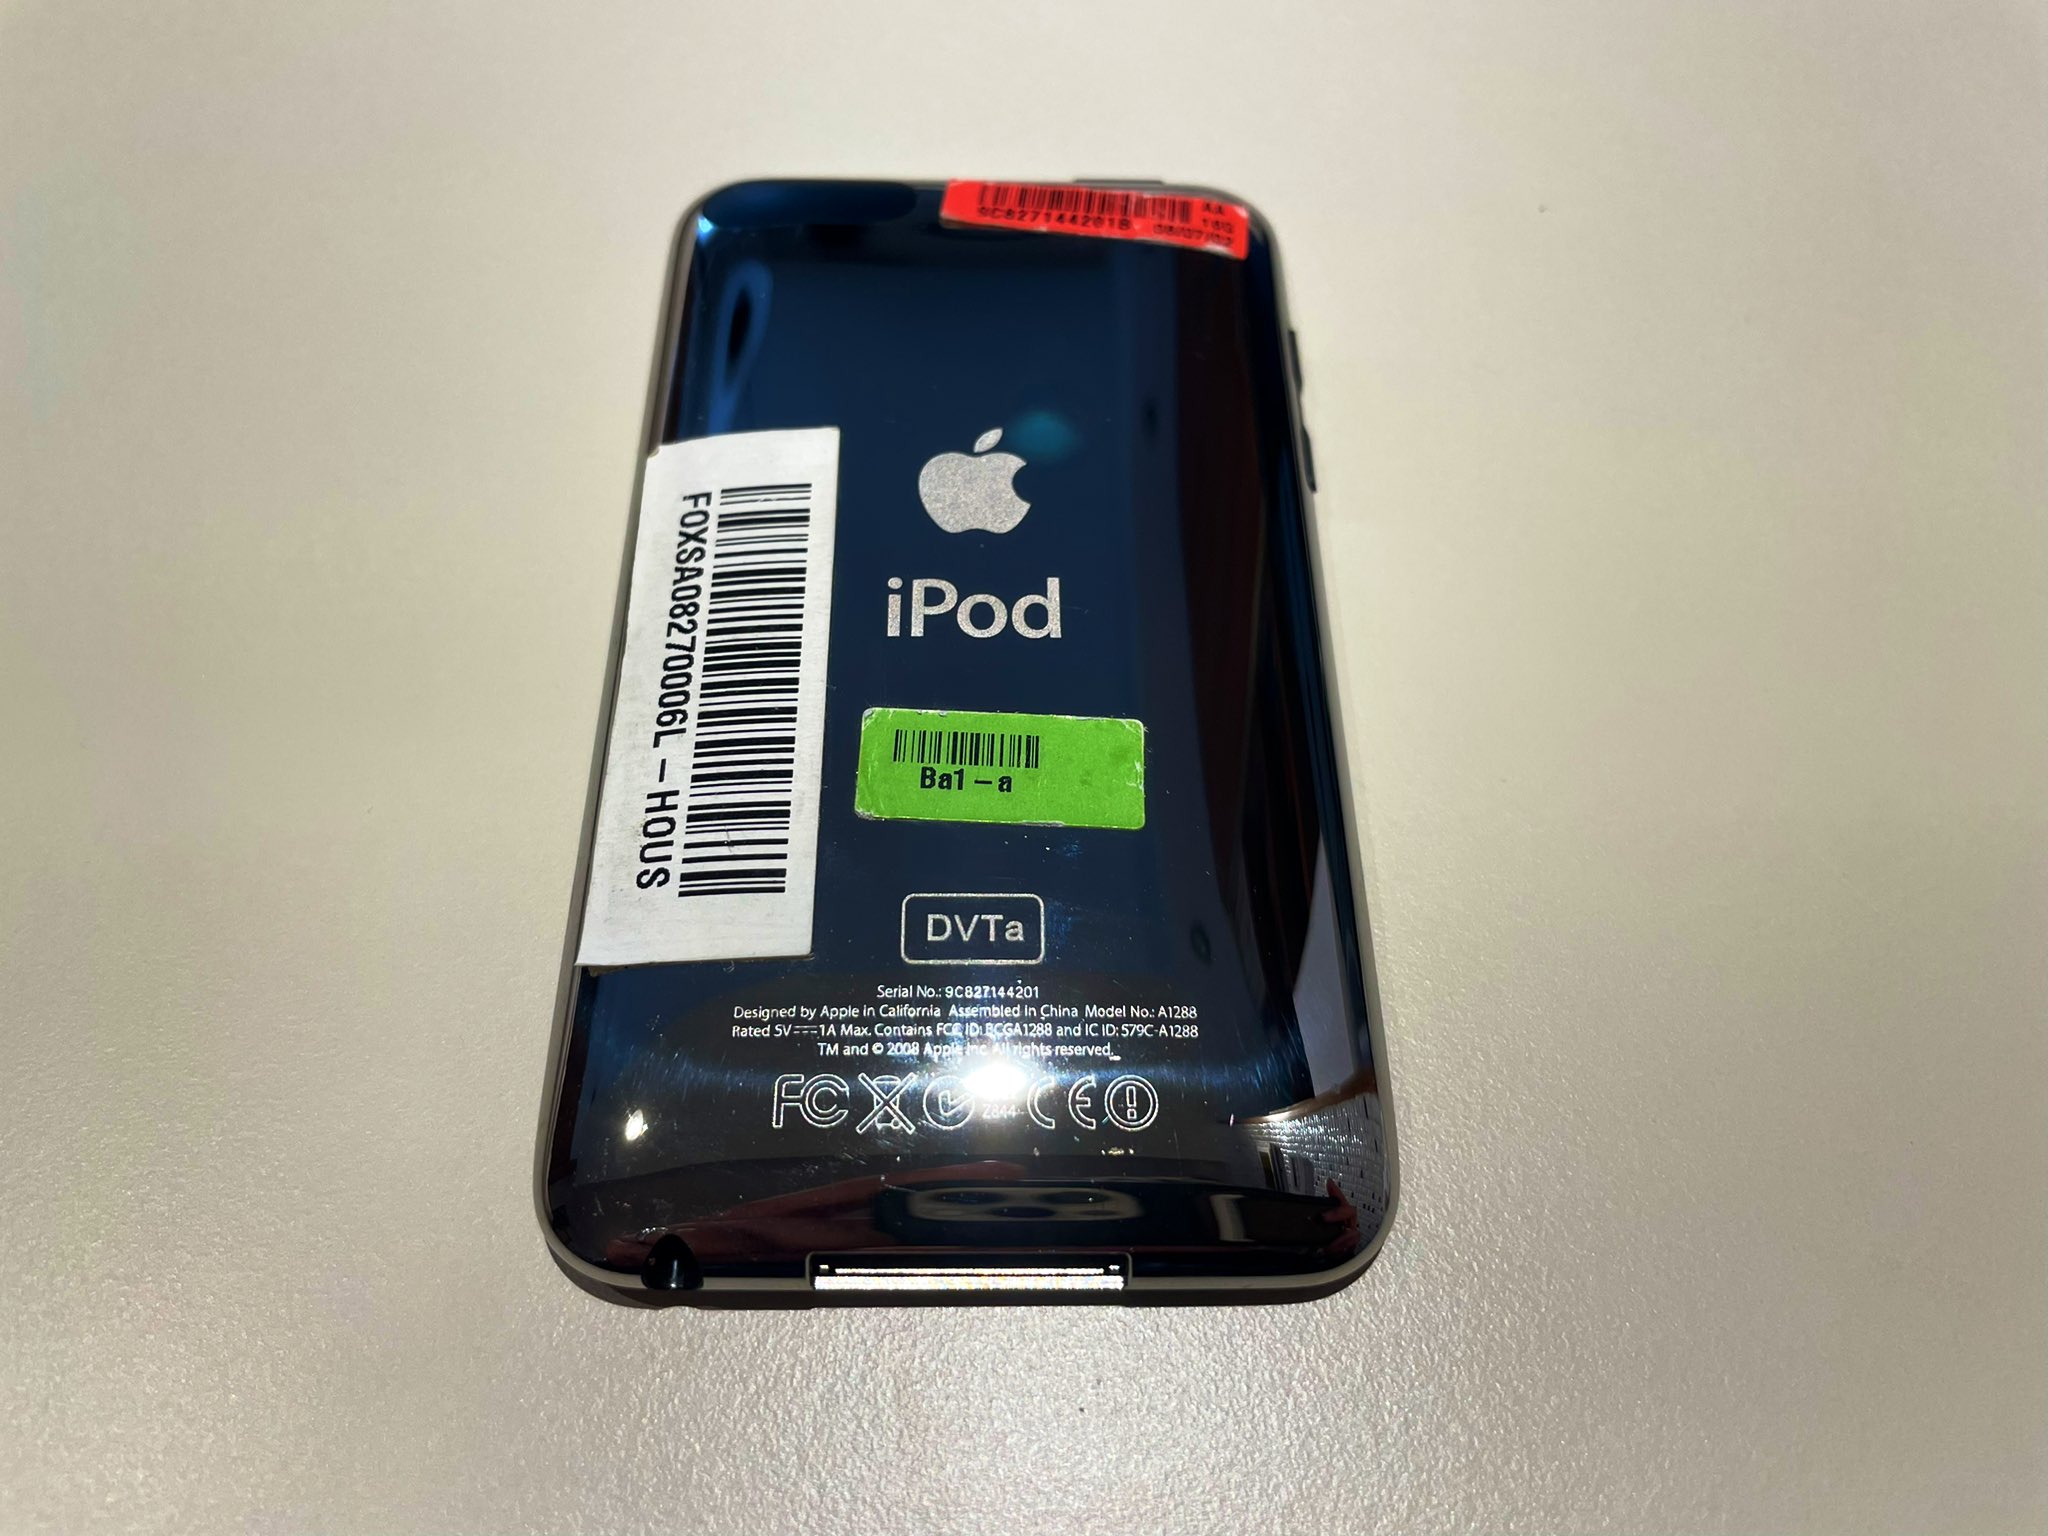 Præfiks Gum Spændende Giulio Zompetti on Twitter: "Perfect #iPod touch 2nd generation prototype.  DVTa stage, manufactured in early 2009. #AppleCollection  https://t.co/Nt6PJSn3iC" / X